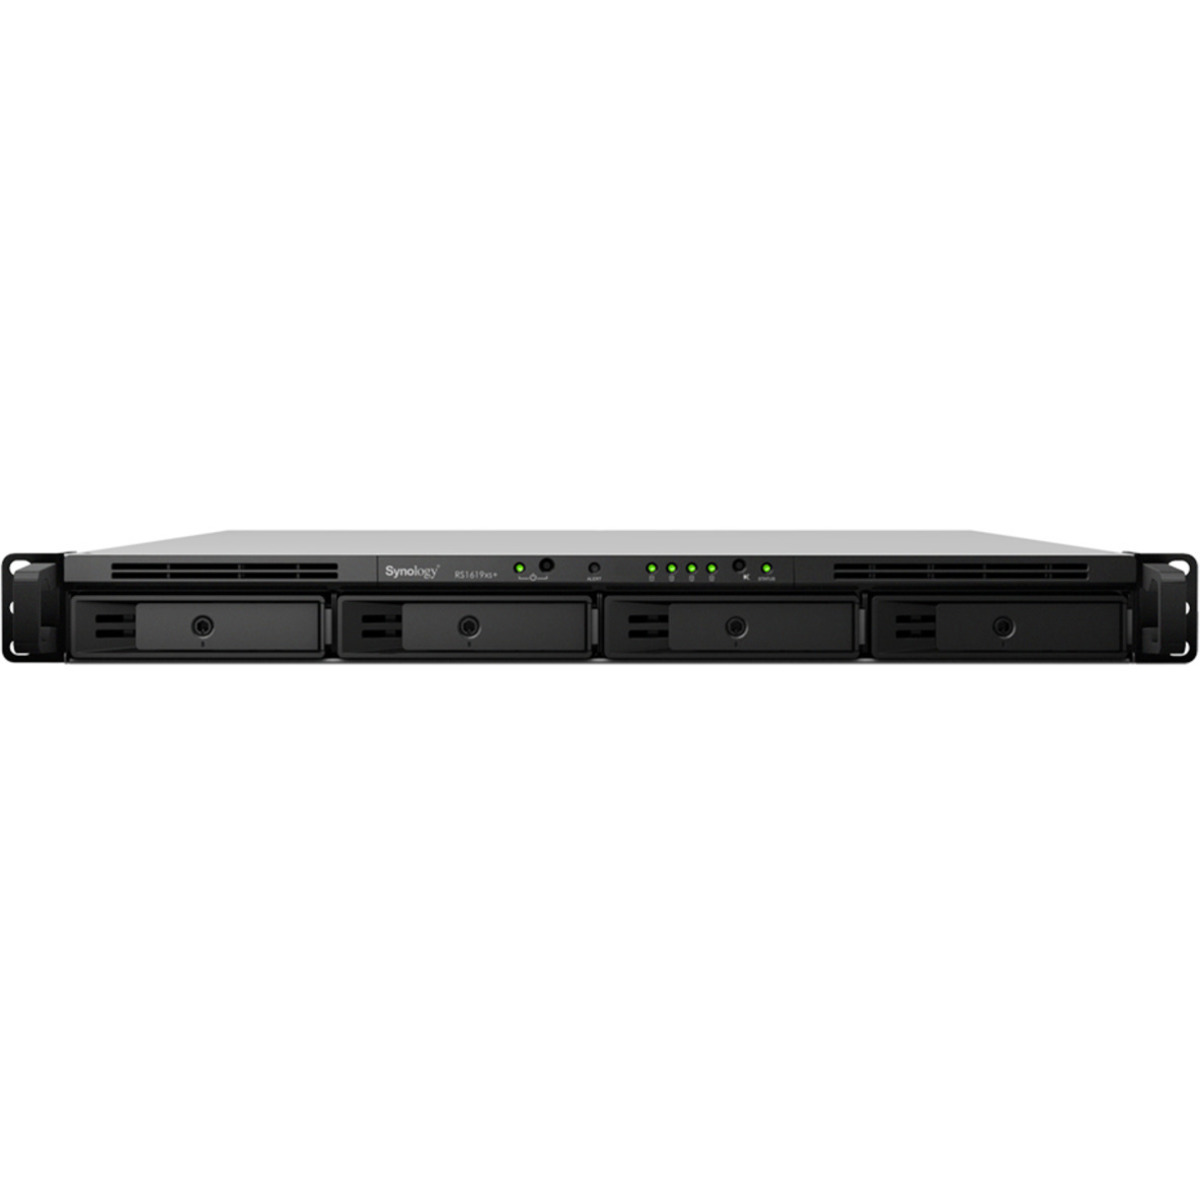 Synology RackStation RS1619xs+ 32tb 4-Bay RackMount Multimedia / Power User / Business NAS - Network Attached Storage Device 4x8tb Western Digital Ultrastar DC HC320 HUS728T8TALE6L4 3.5 7200rpm SATA 6Gb/s HDD ENTERPRISE Class Drives Installed - Burn-In Tested RackStation RS1619xs+